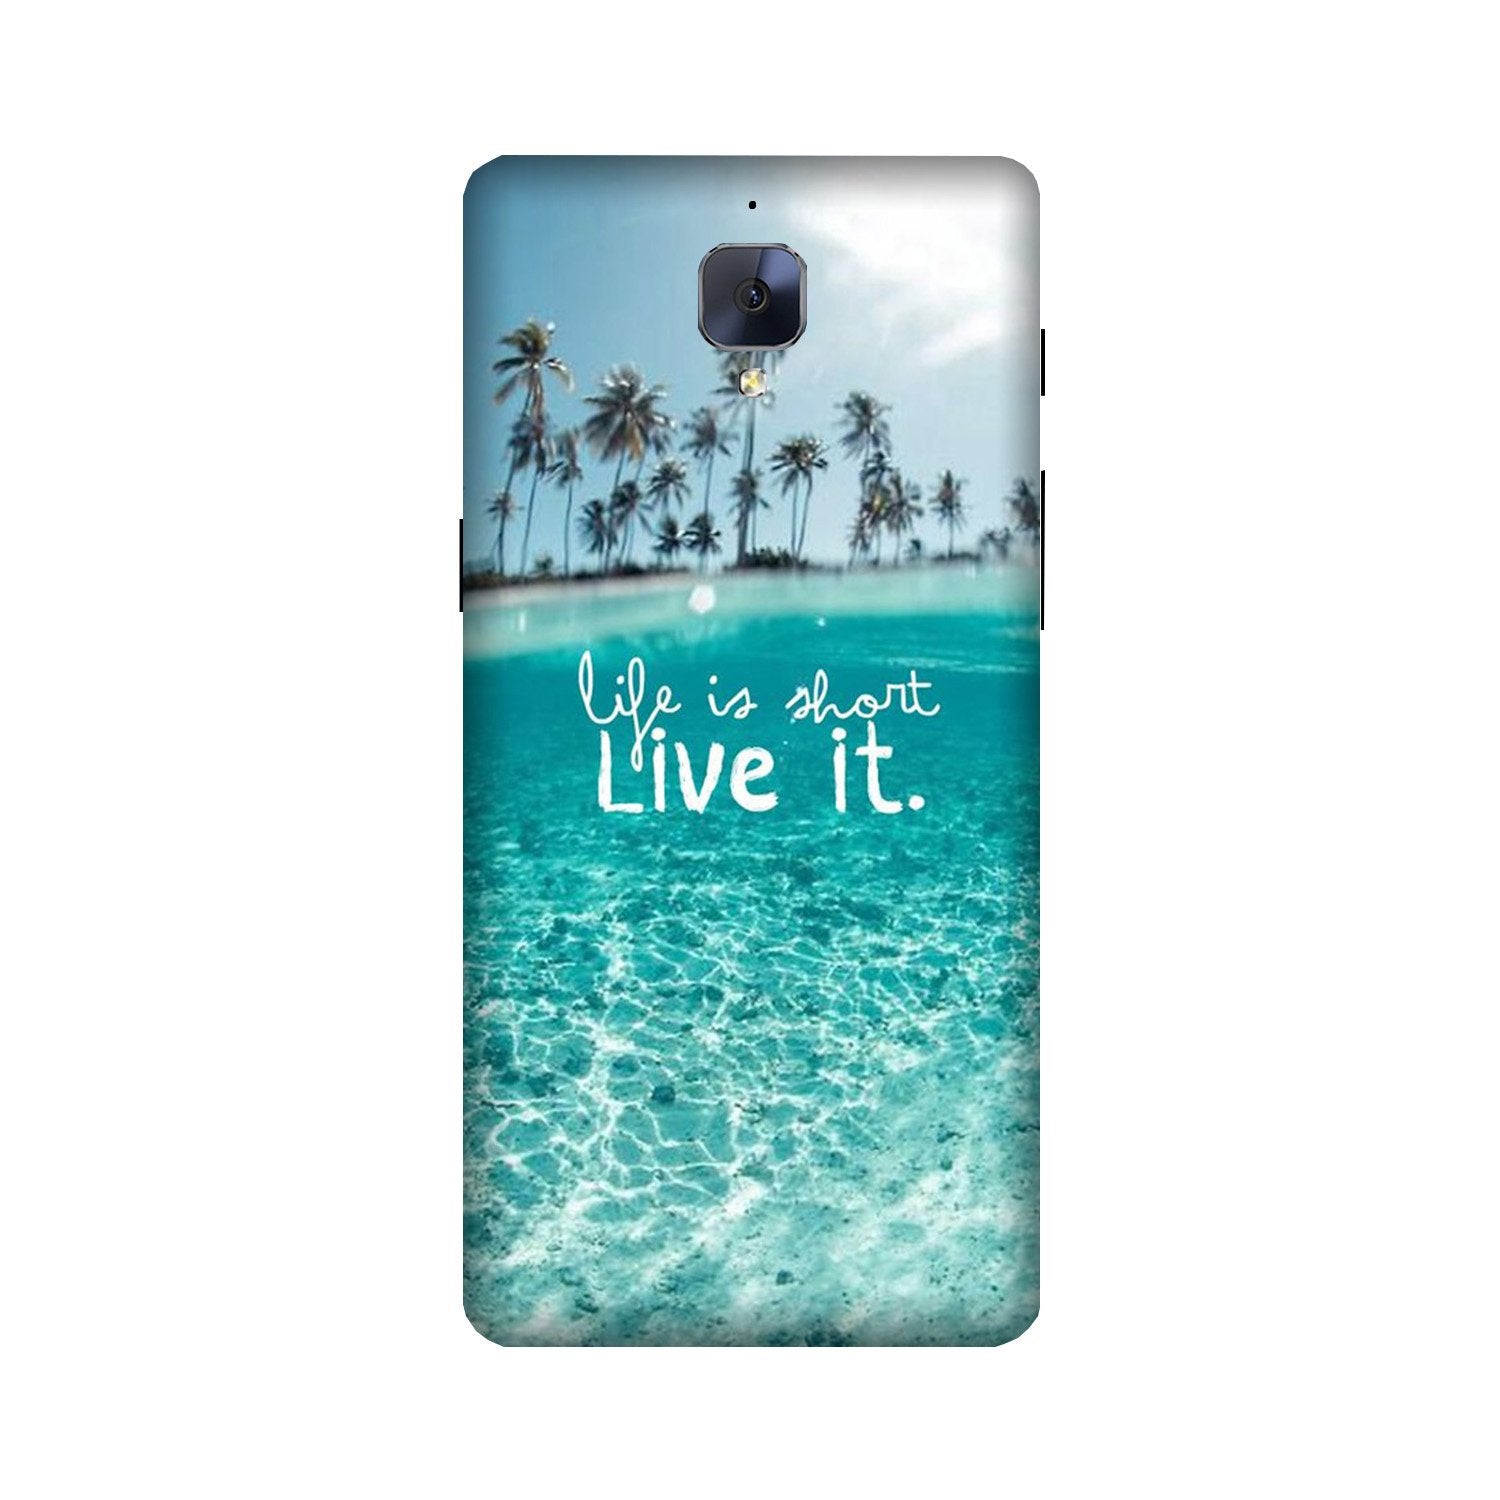 Life is short live it Case for OnePlus 3/ 3T